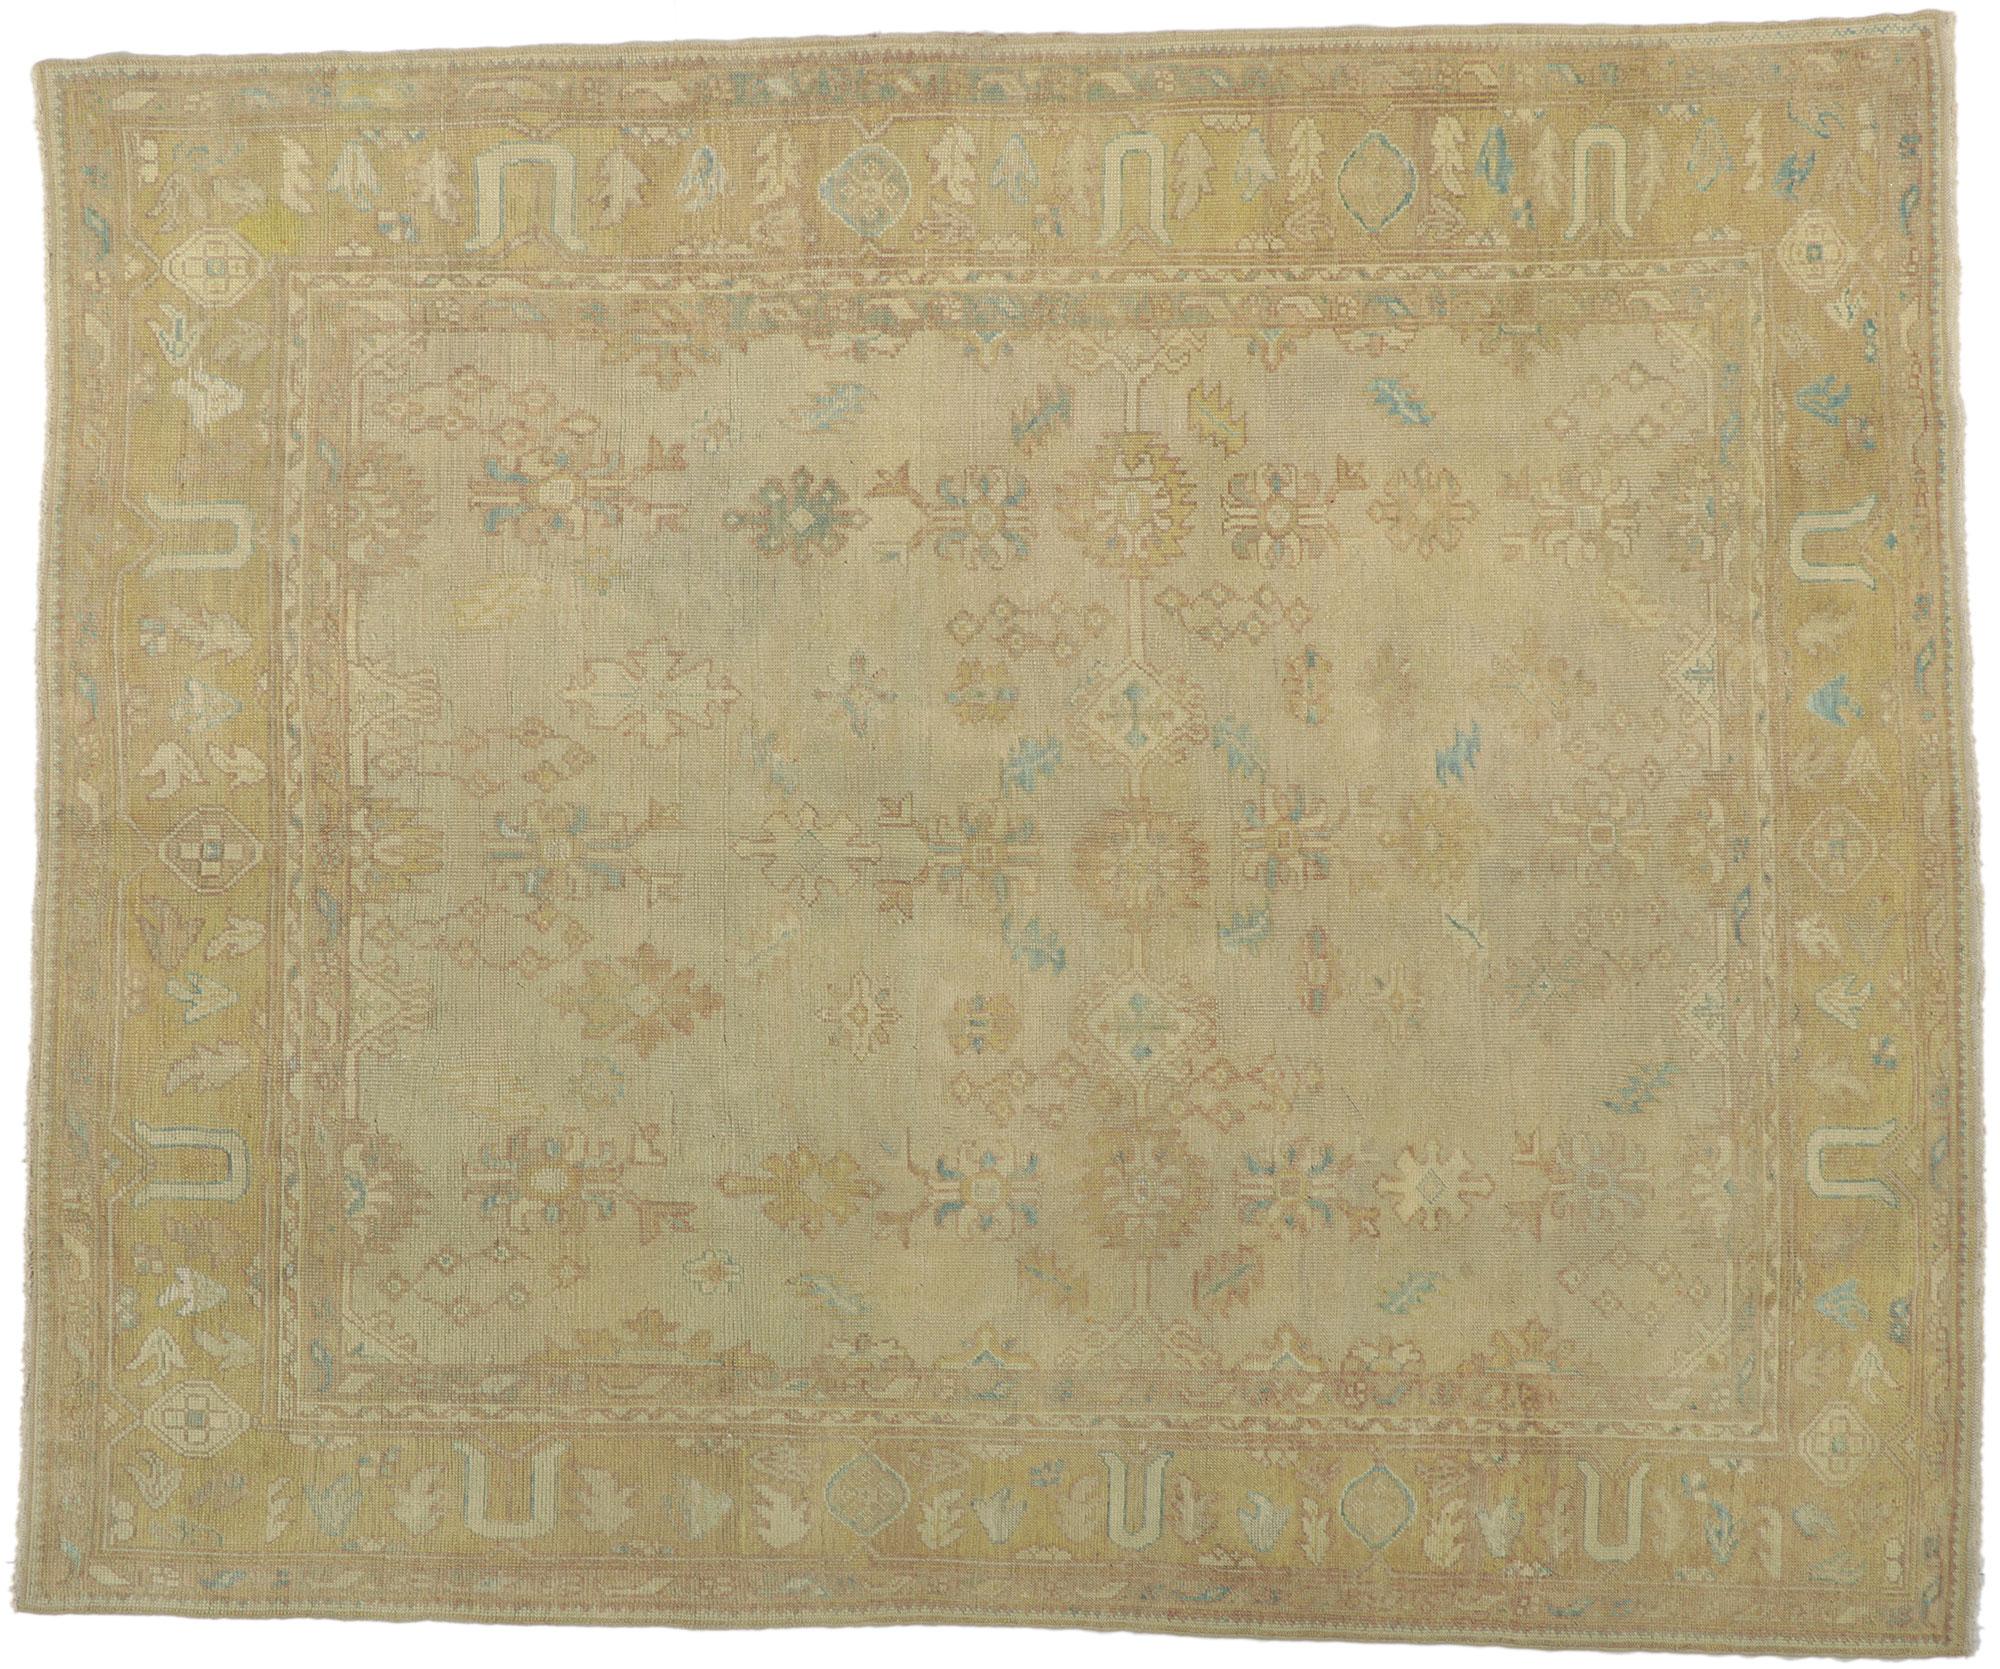 New Vintage-Style Turkish Oushak Rug with Soft Earth-Tone Colors For Sale 2